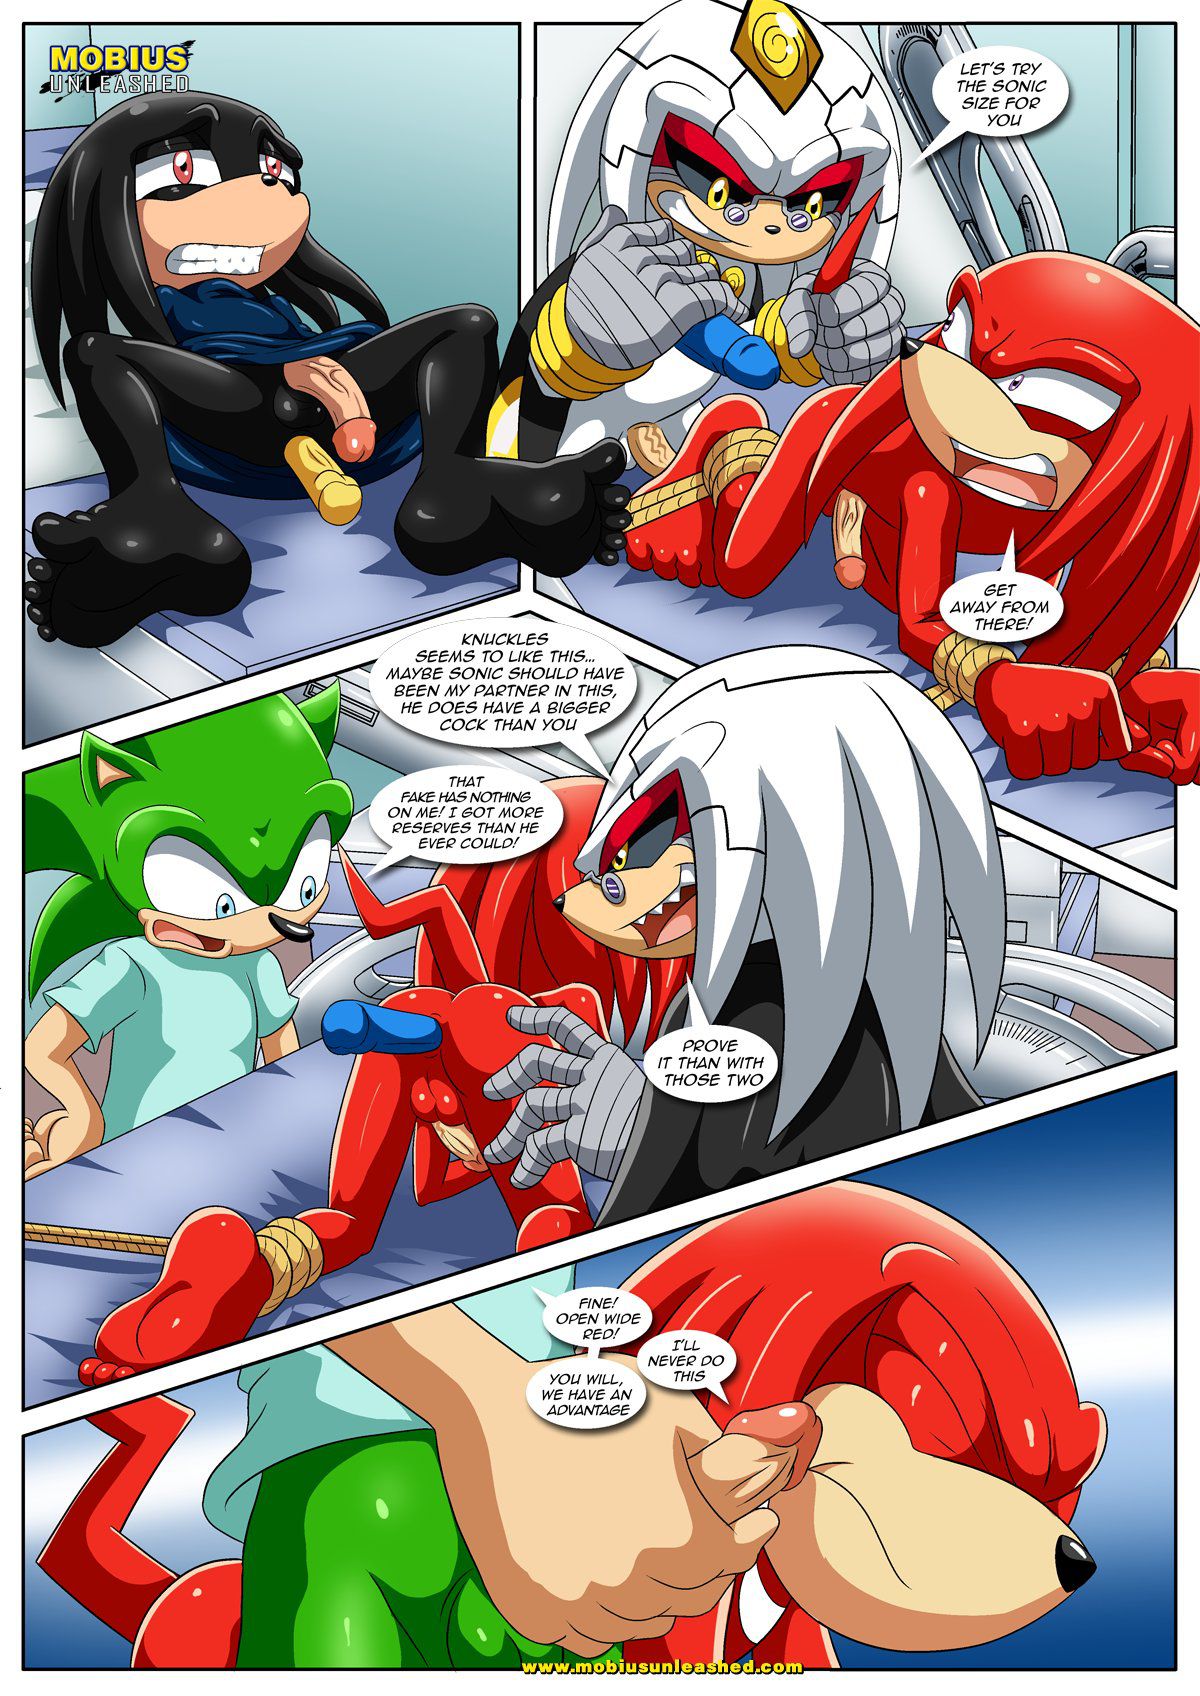 [Palcomix] The Doctor Will See You Now 2 (Sonic The Hedgehog) [Ongoing] 5